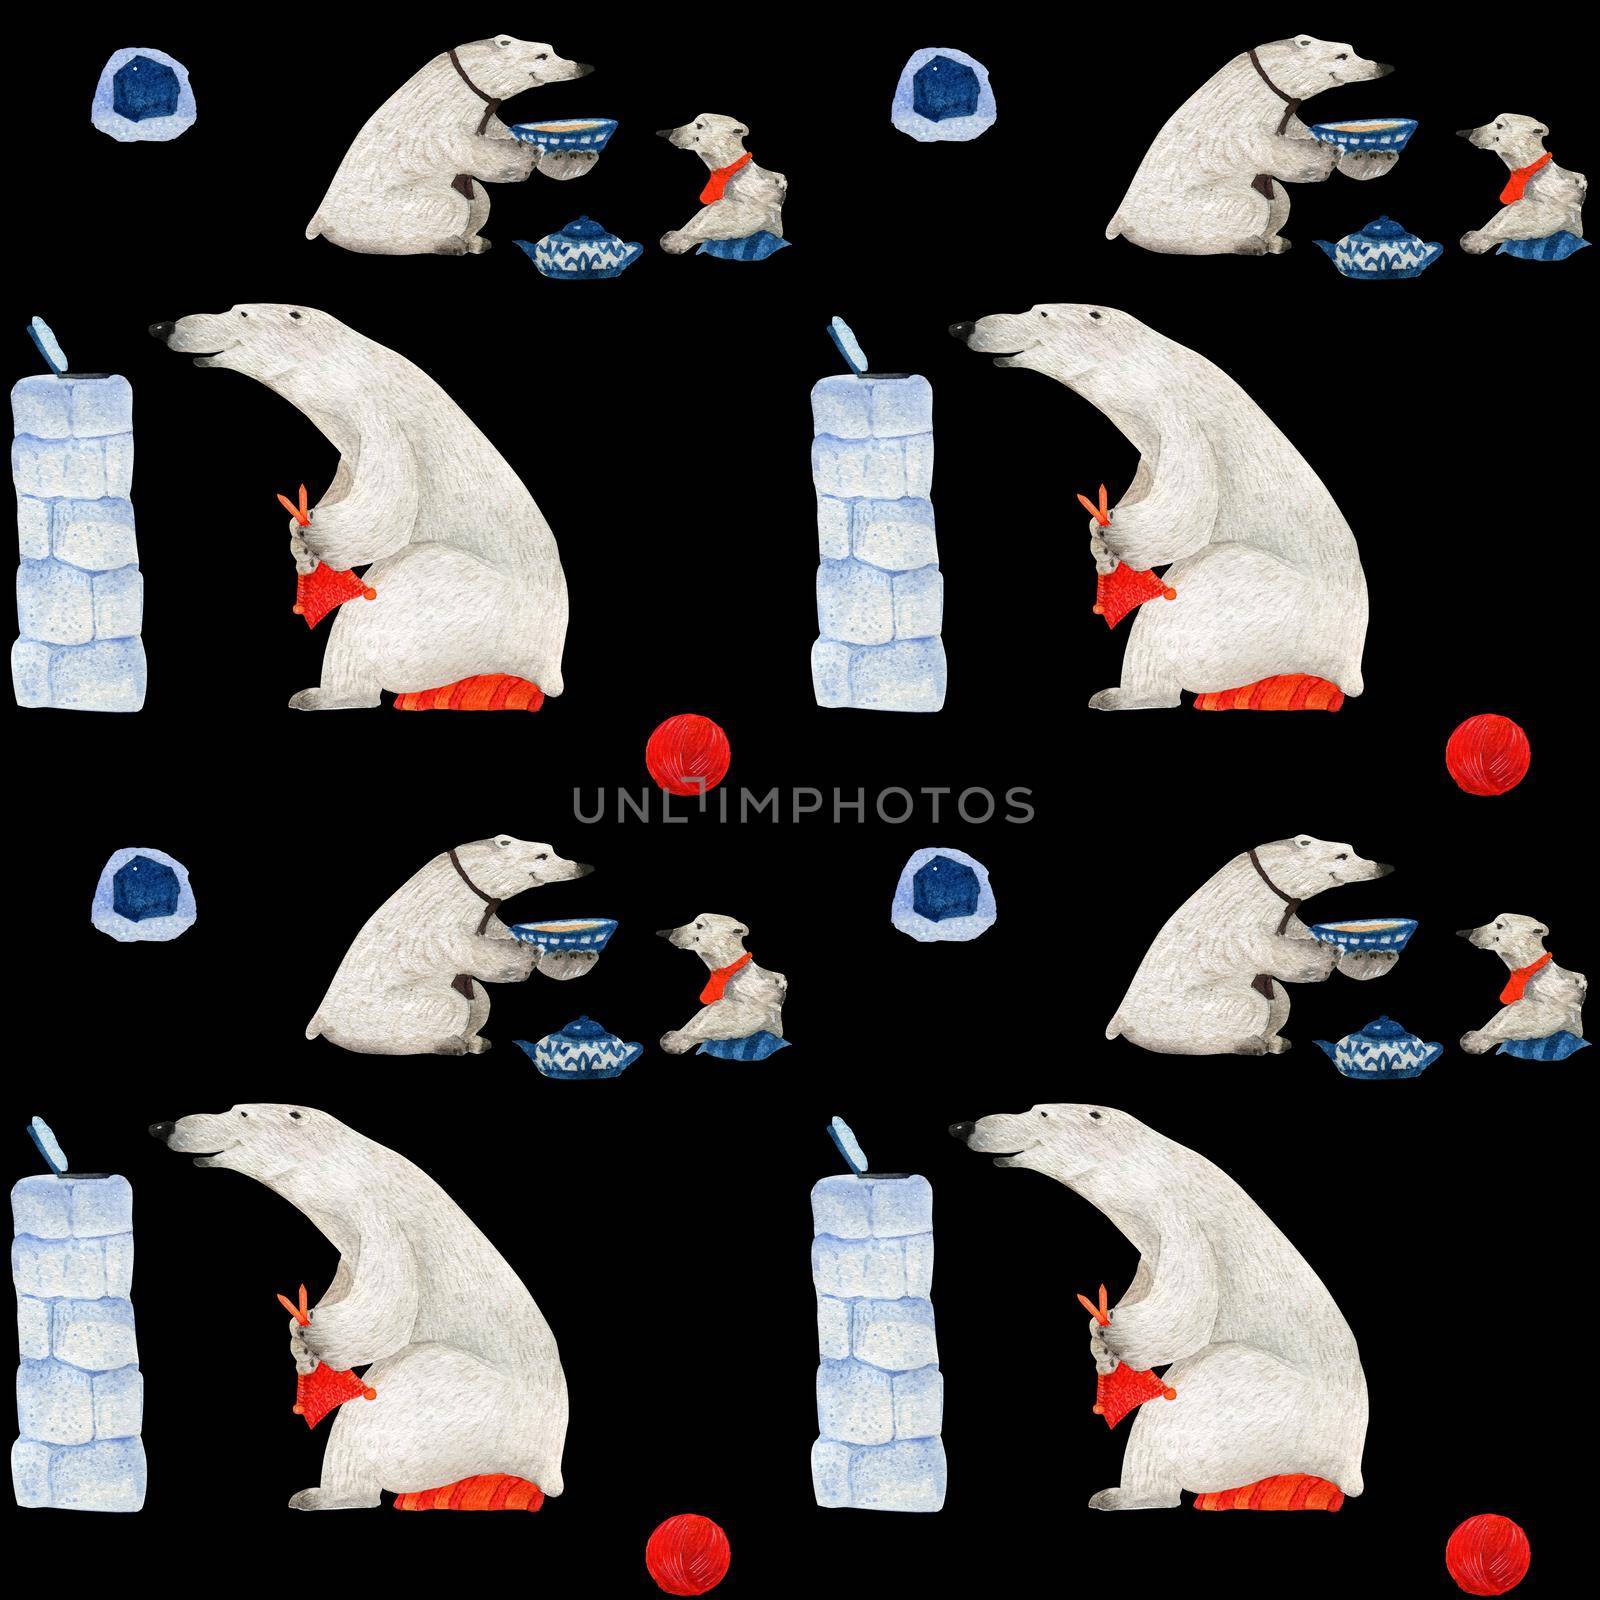 Polar bears drink tea and knitting. Watercolor seamless patterns for textile, wrapping paper and any tiled design. Black background, clipping path uncluded